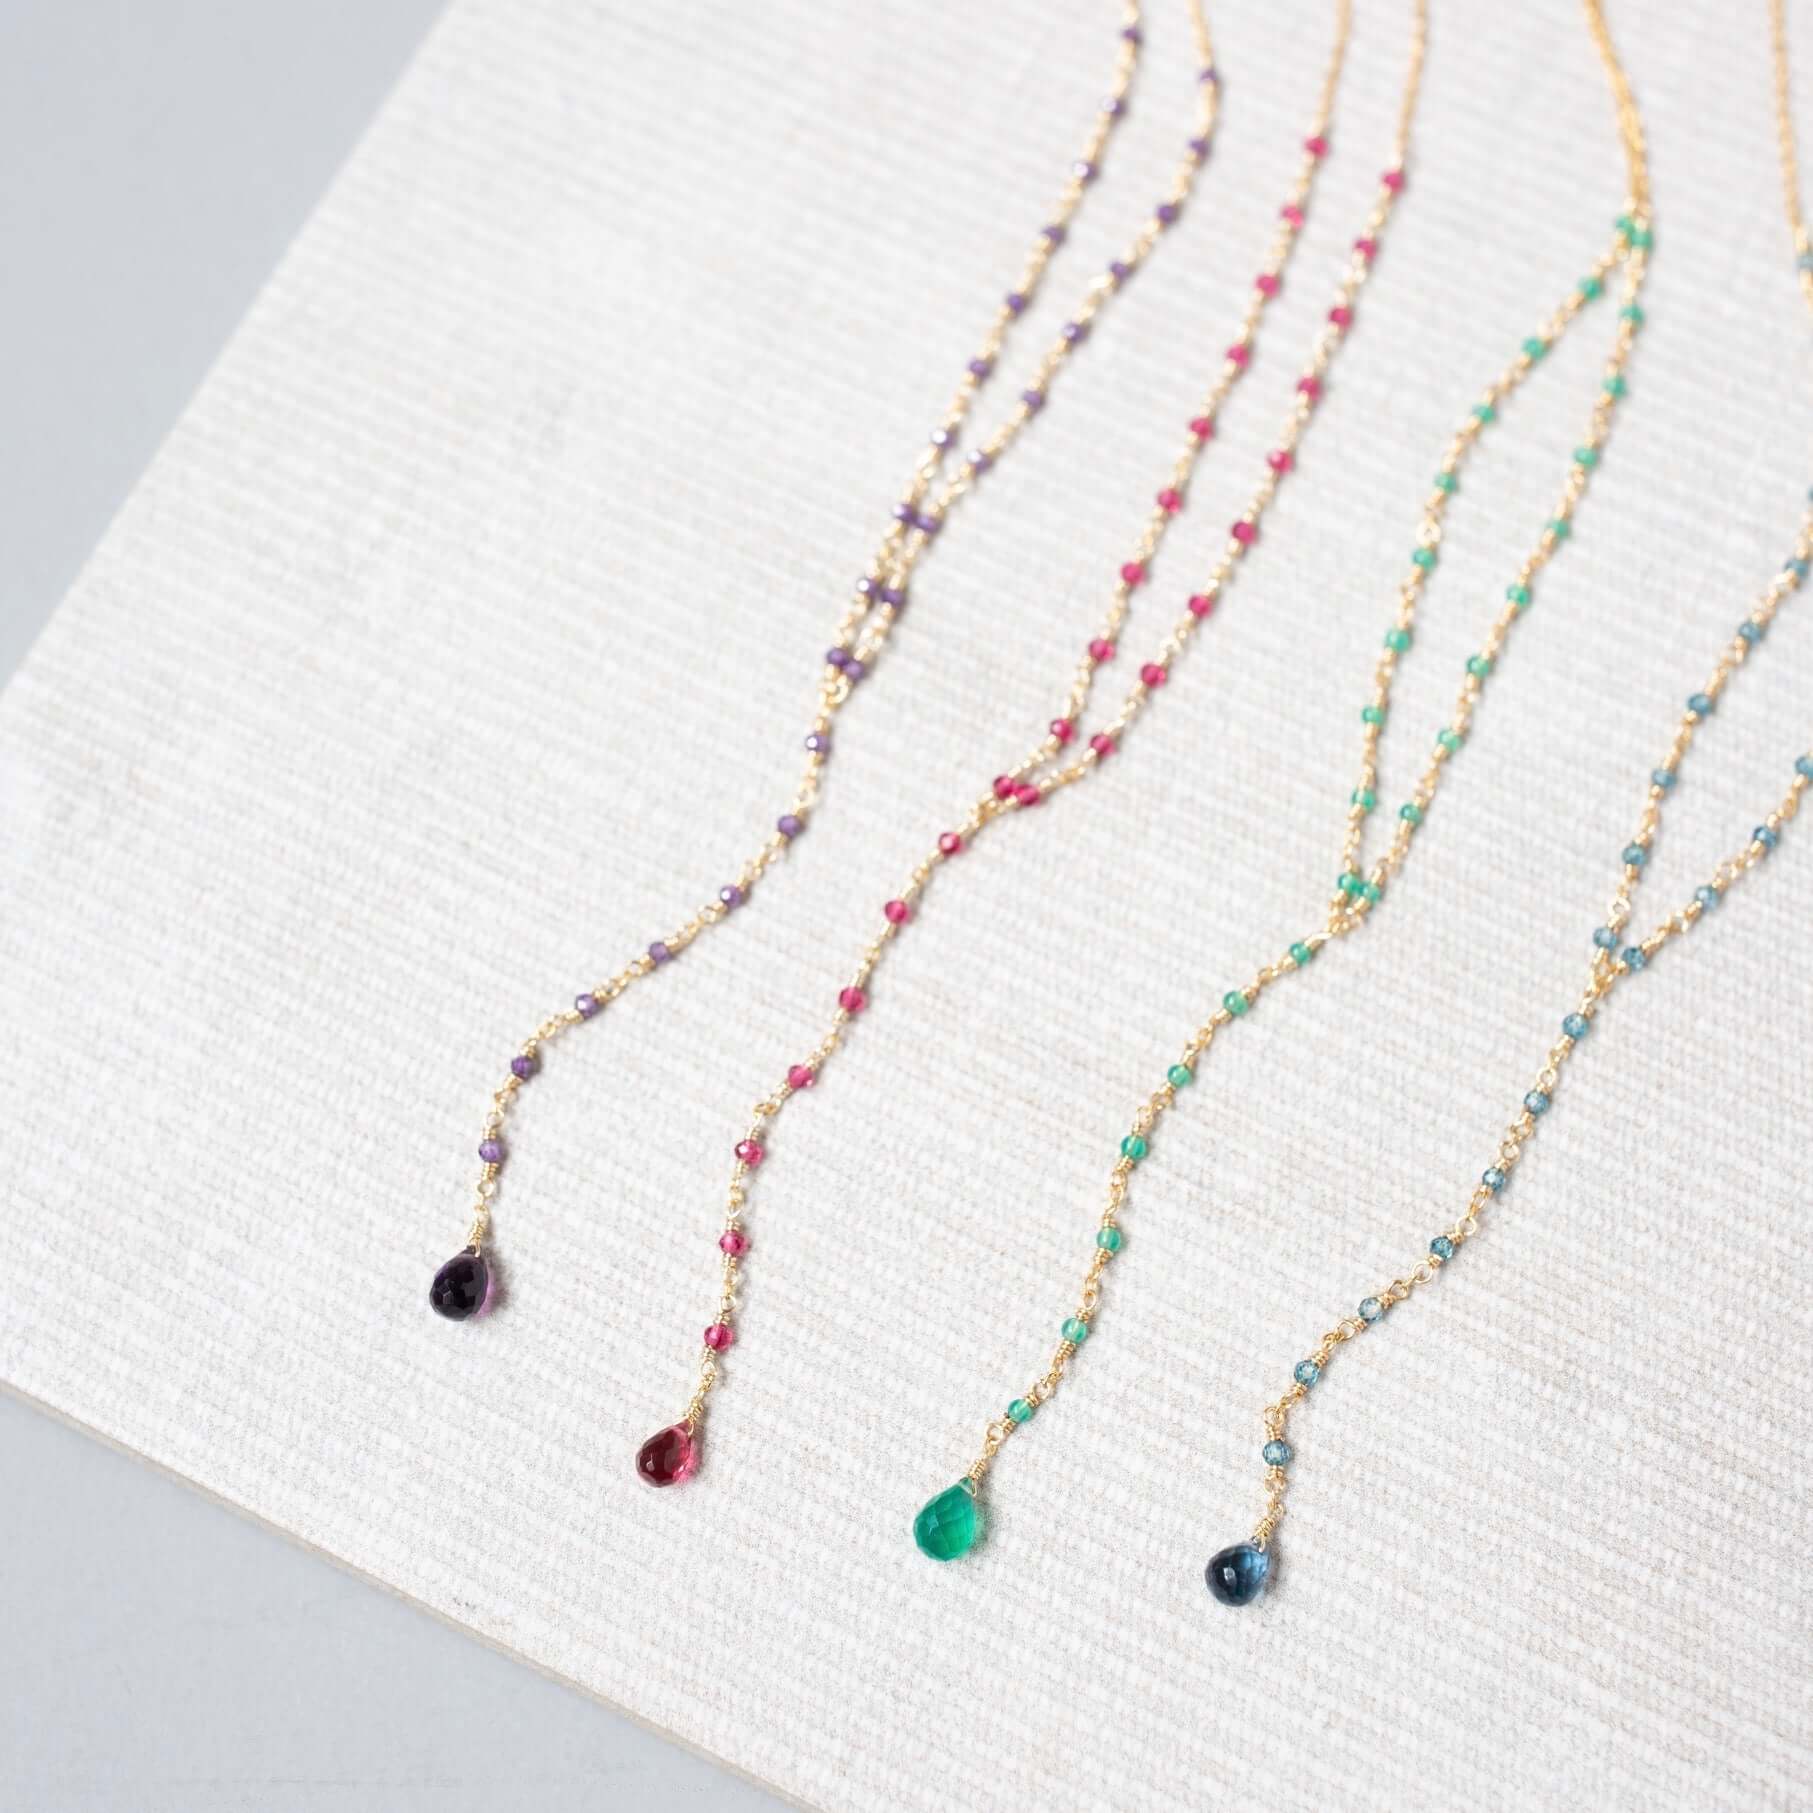 Casually arranged on a white background, necklaces in lolite, amethyst, pink tourmaline quartz, and green onyx bring a natural charm to the scene.